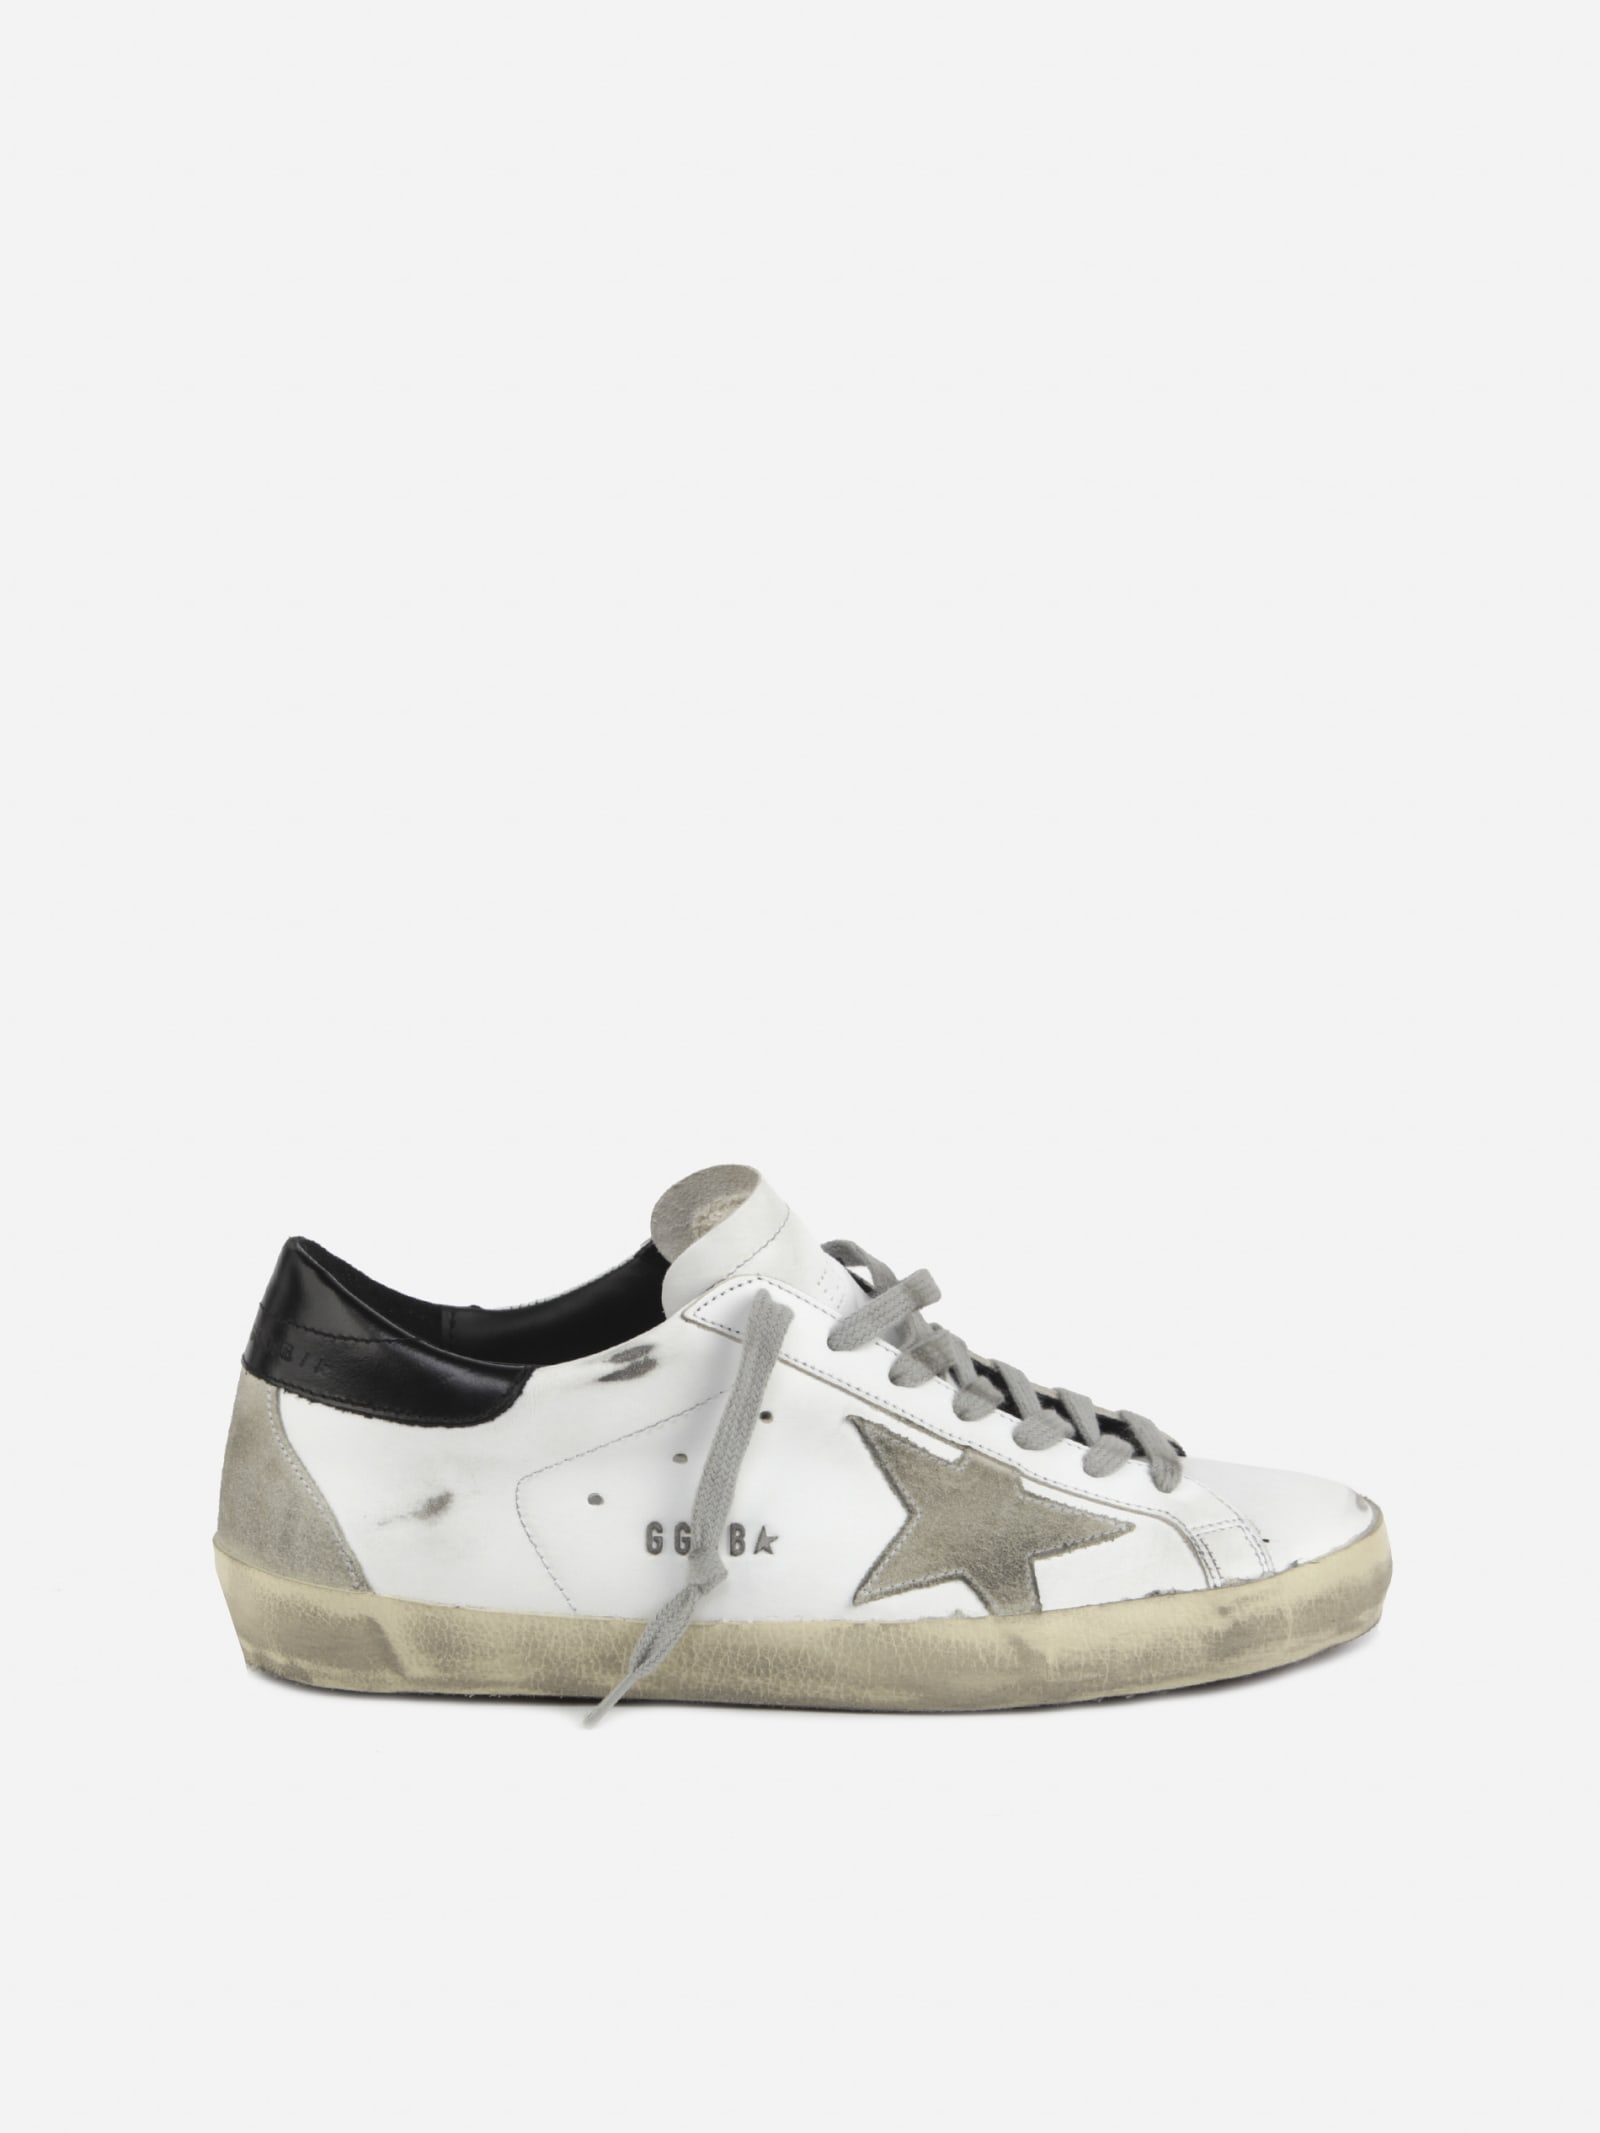 Golden Goose Superstar Sneakers In Leather With Suede Details